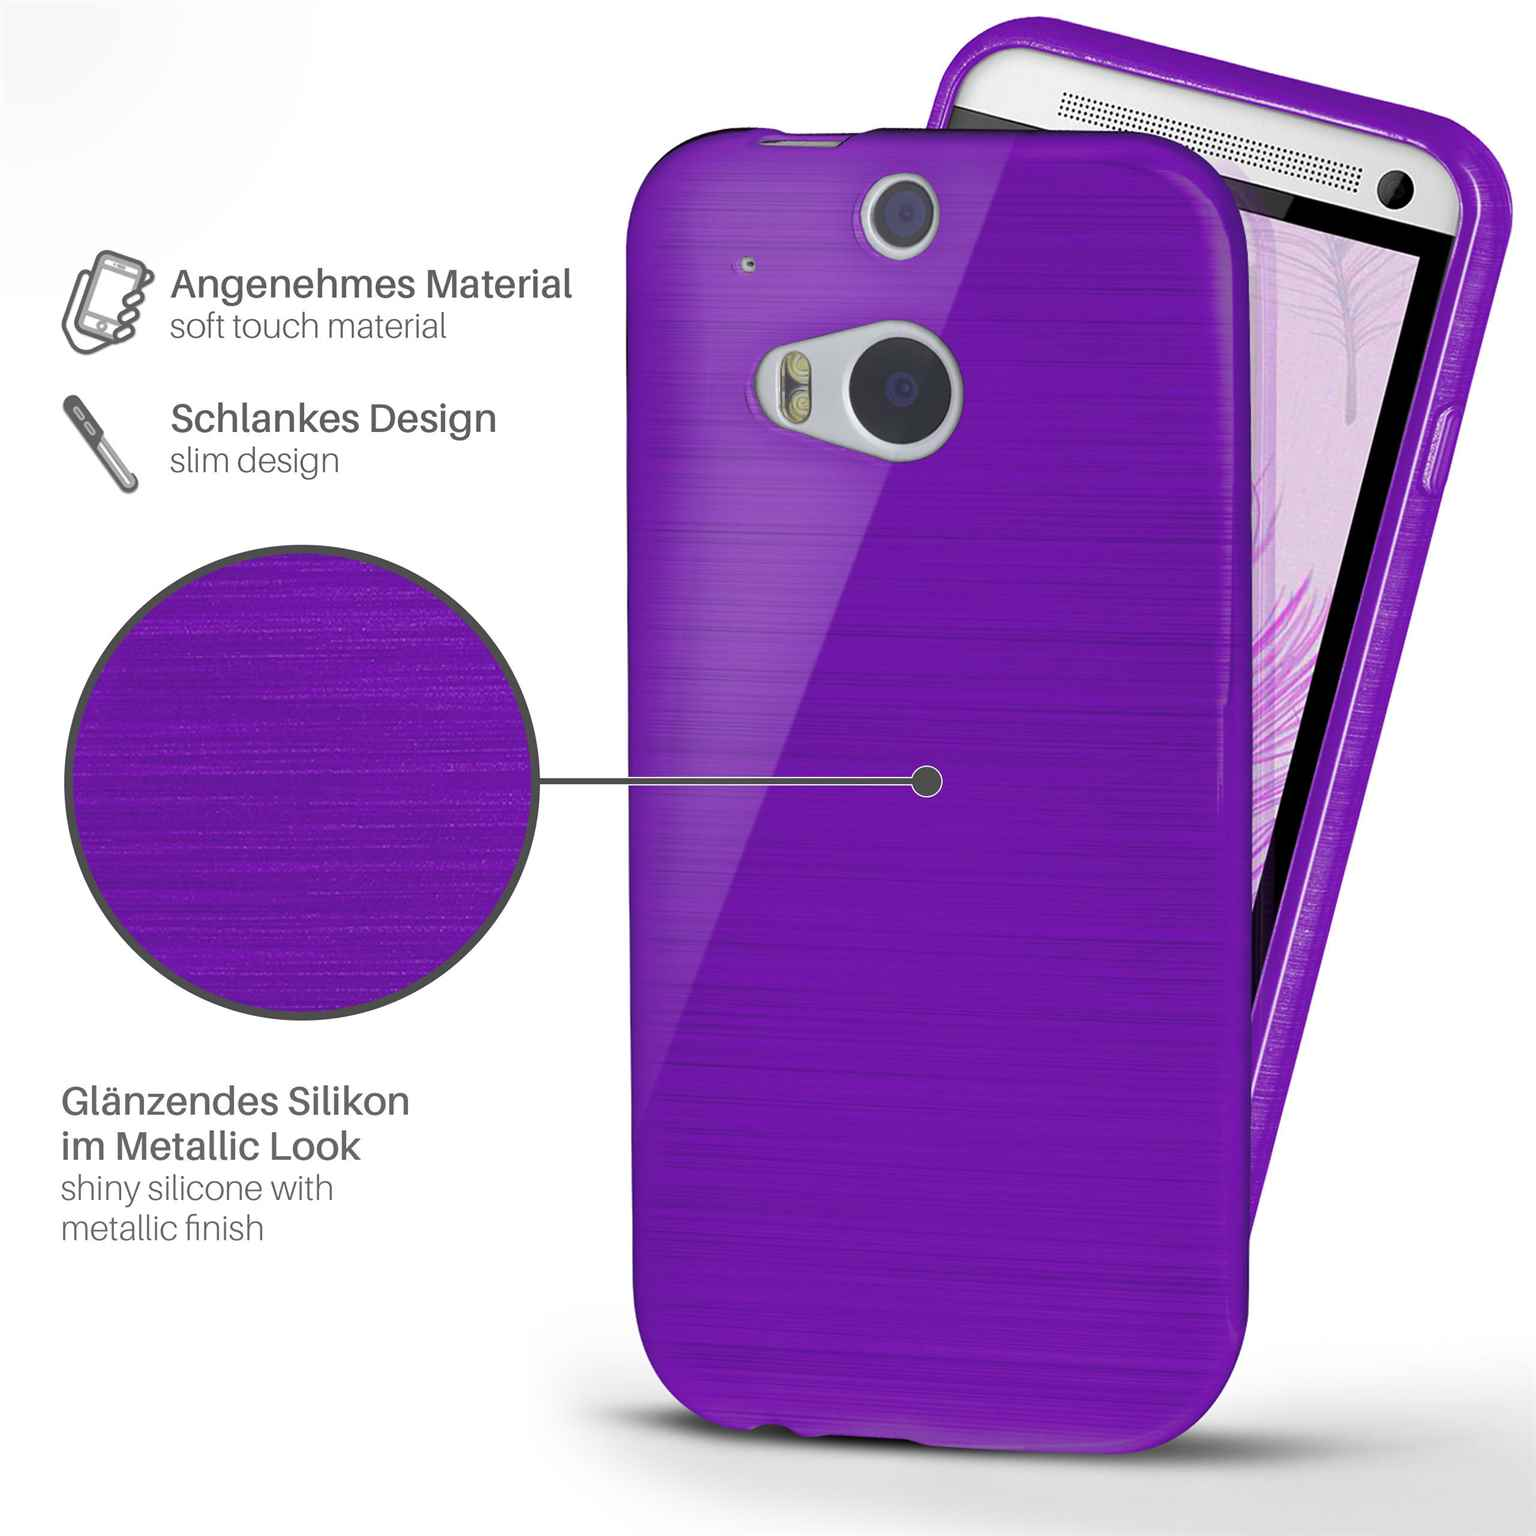 Case, Brushed Backcover, One HTC, Purpure-Purple M8s, MOEX